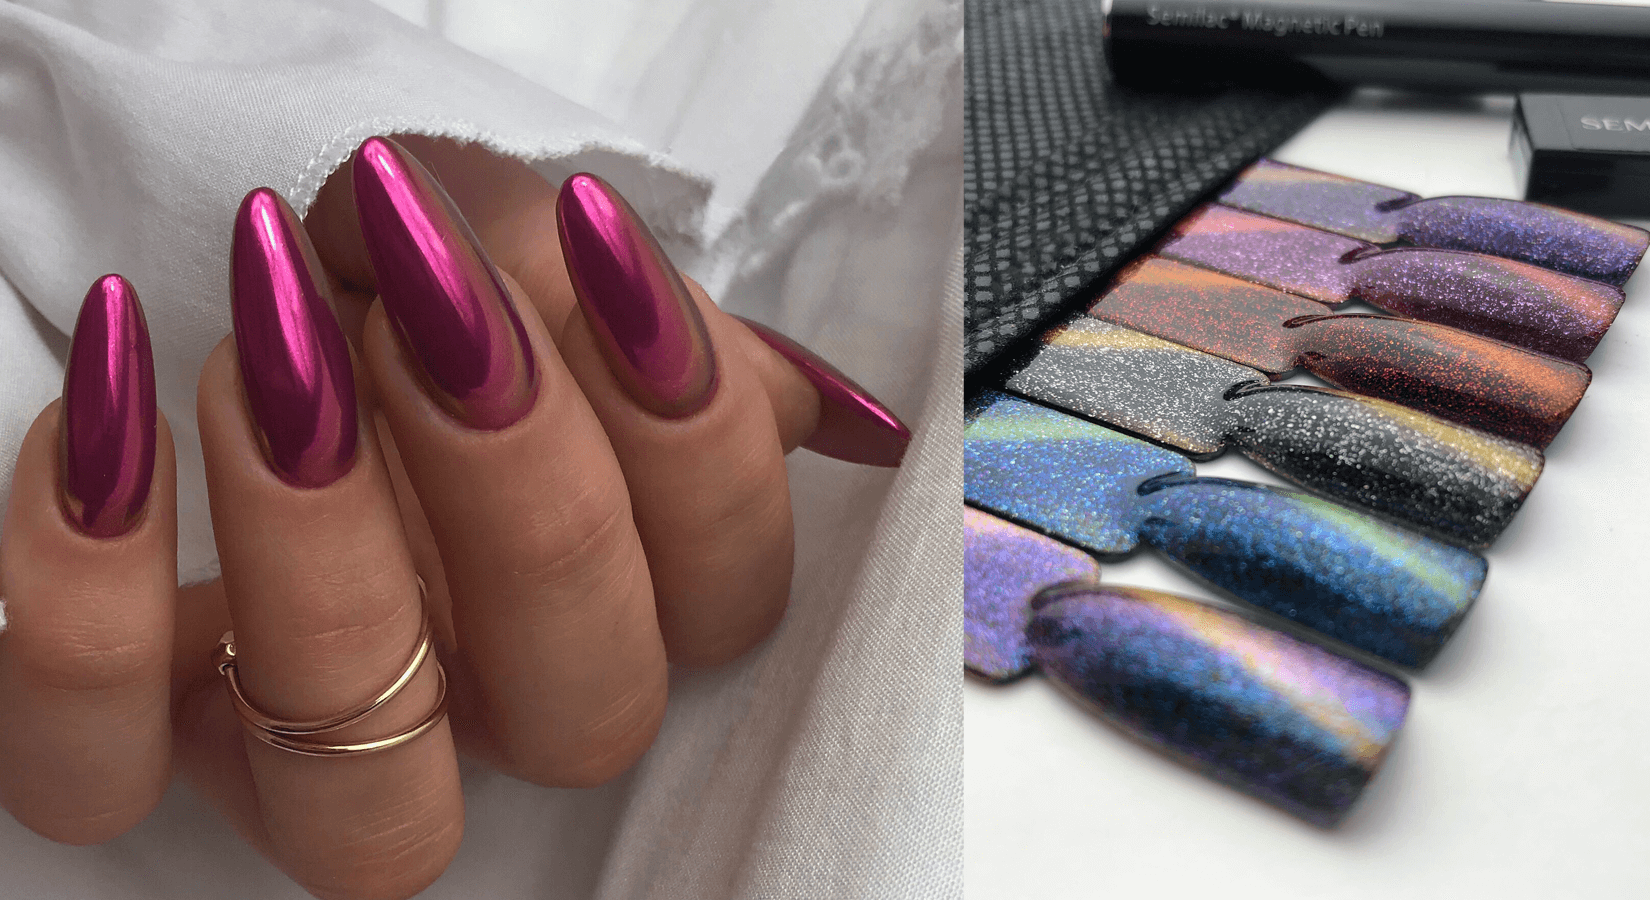 Guy Fawkes Day Nail Art: Designs to Light Up the Night Sky